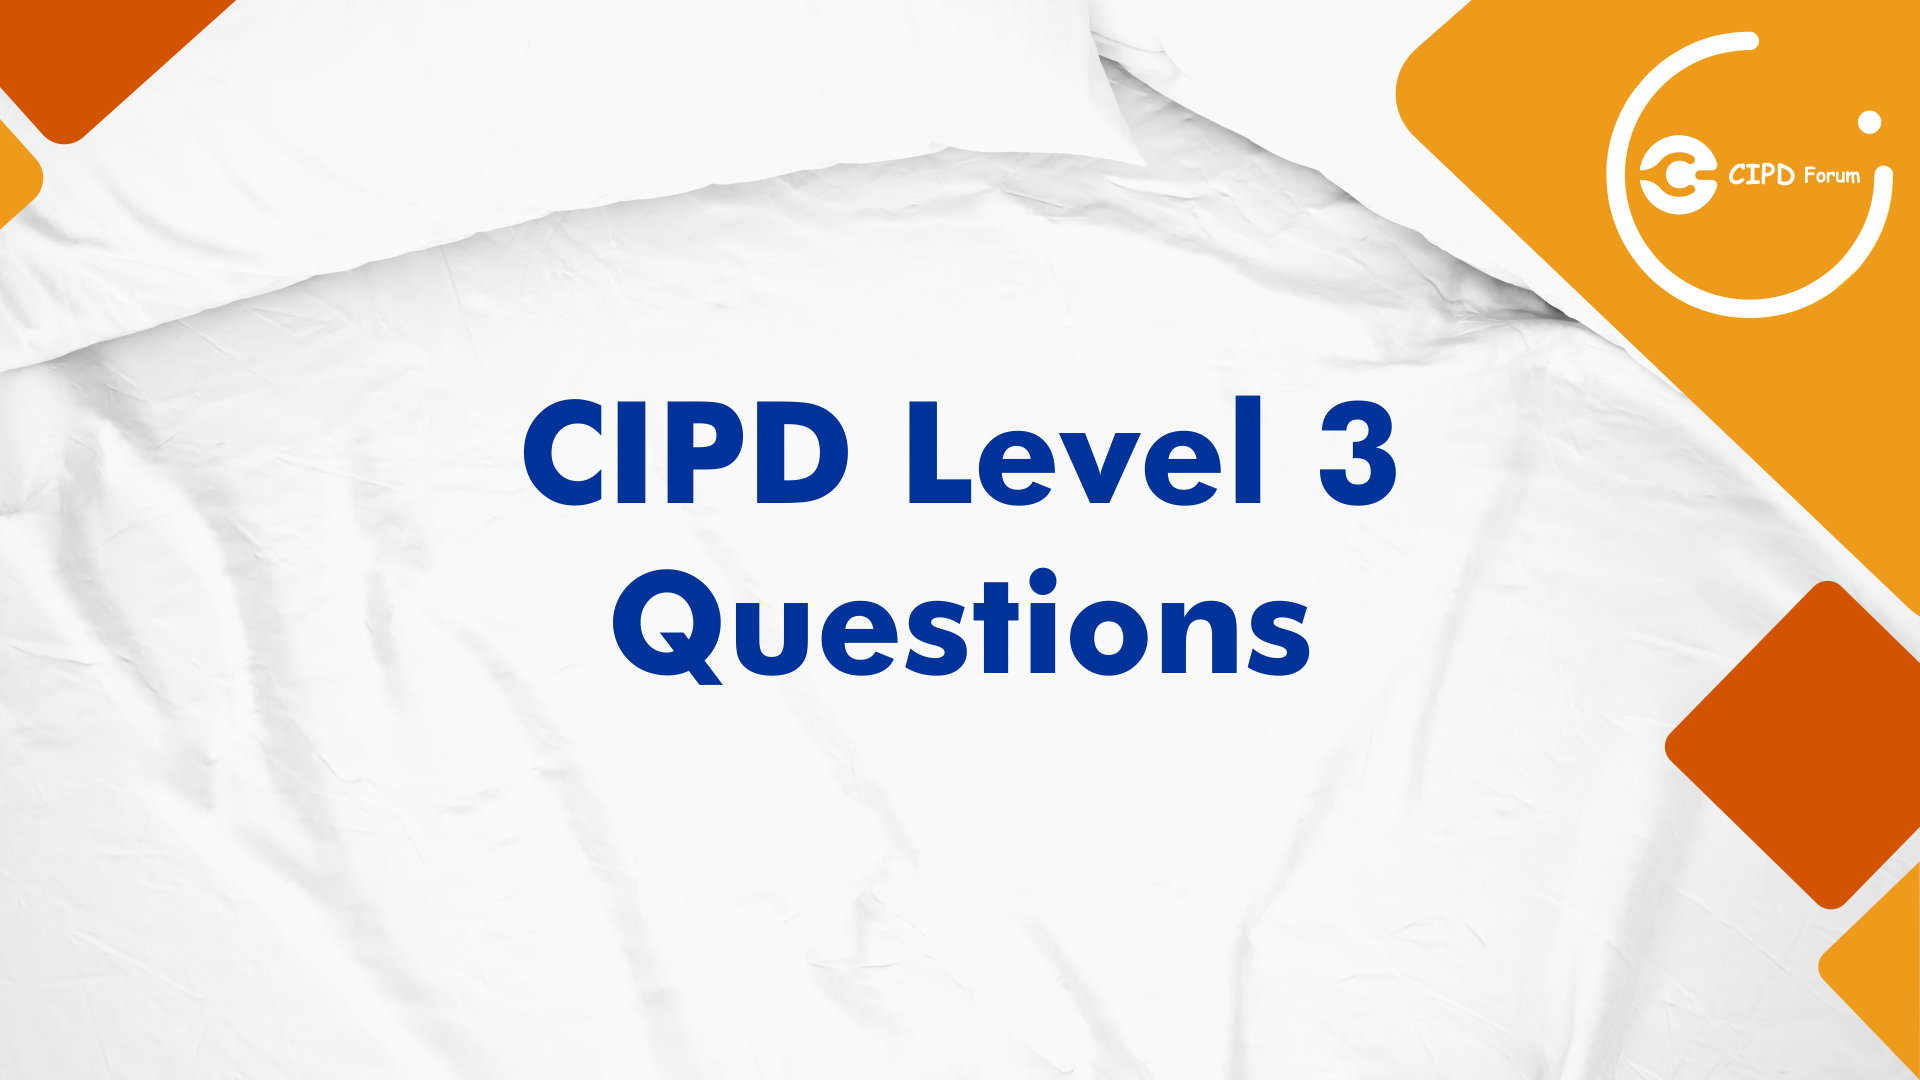 cipd level 3 assignments examples